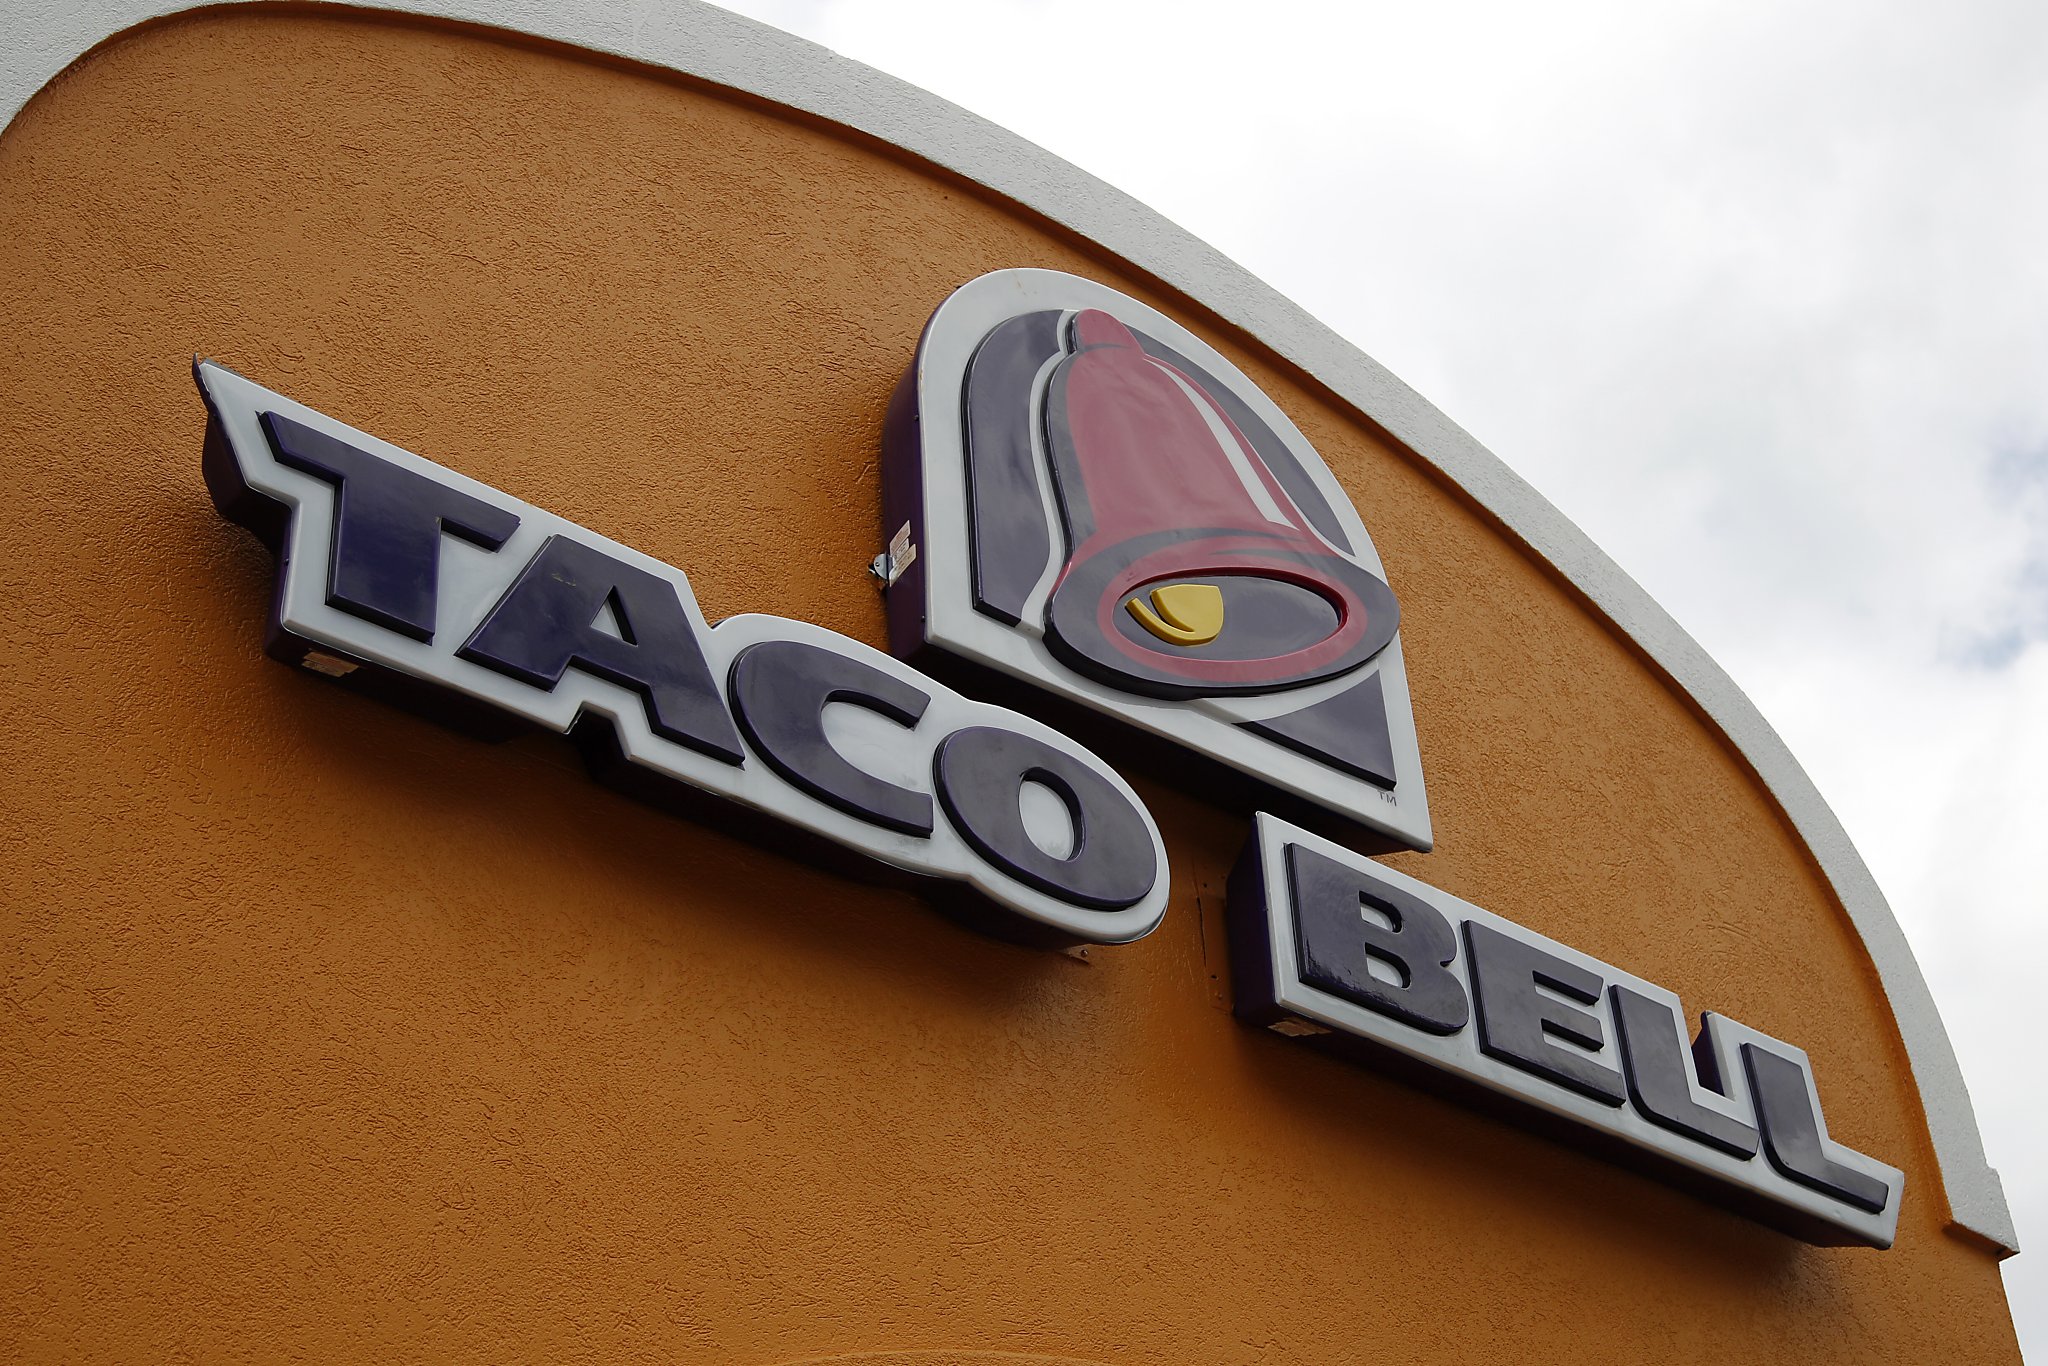 Taco Bell Embroiled In Lawsuit Alleging Sex Act At Holiday Party